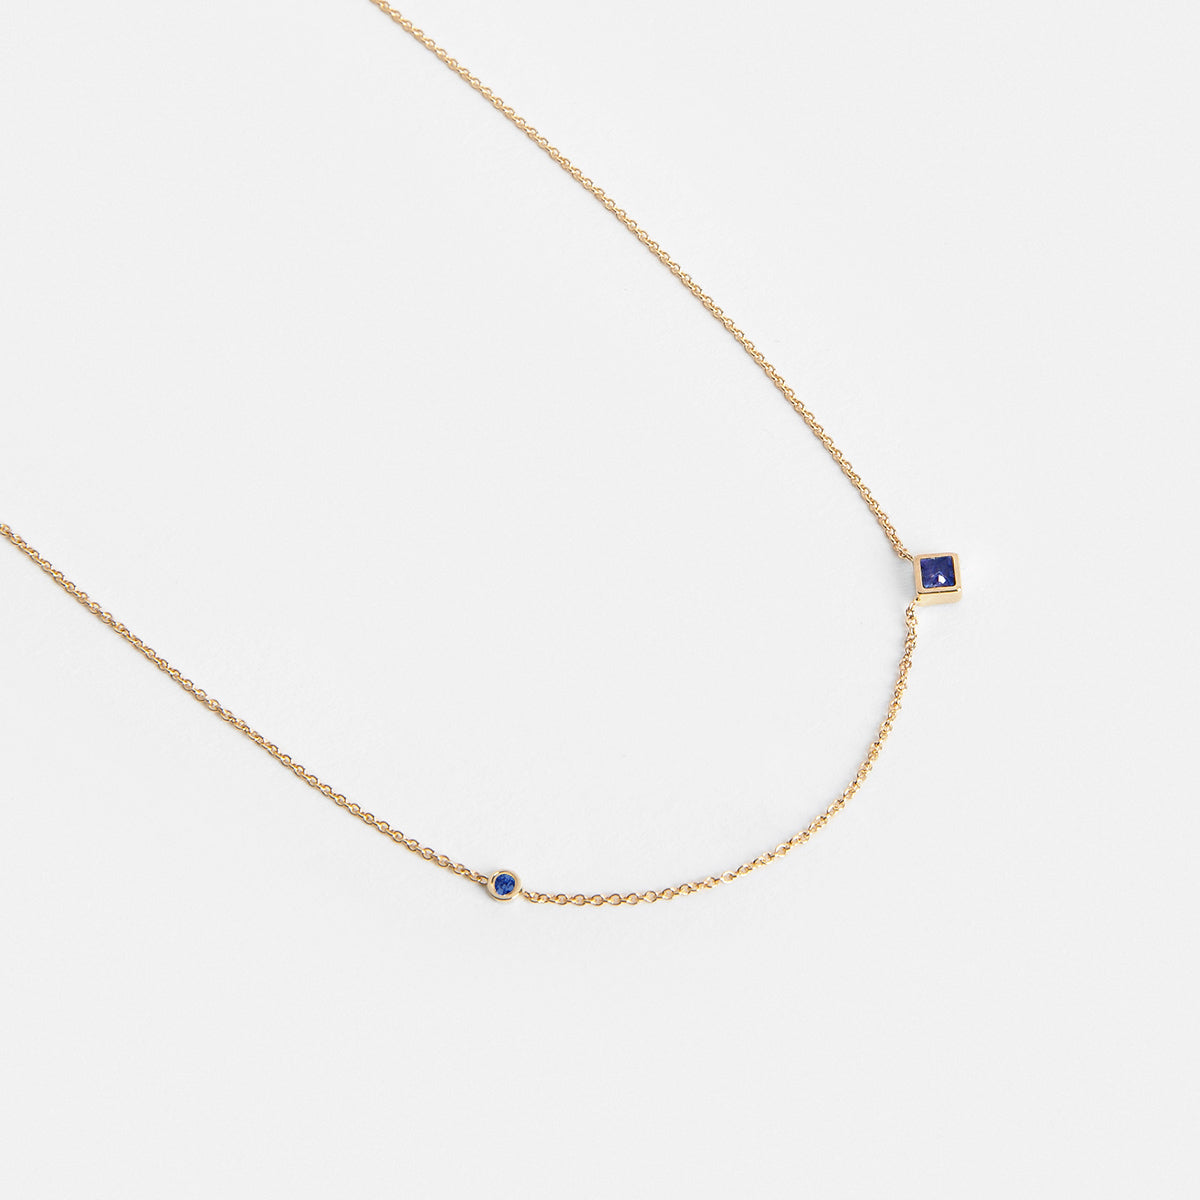 Isu Handmade Necklace in 14k Gold set with Sapphire By SHW Fine Jewelry NYC